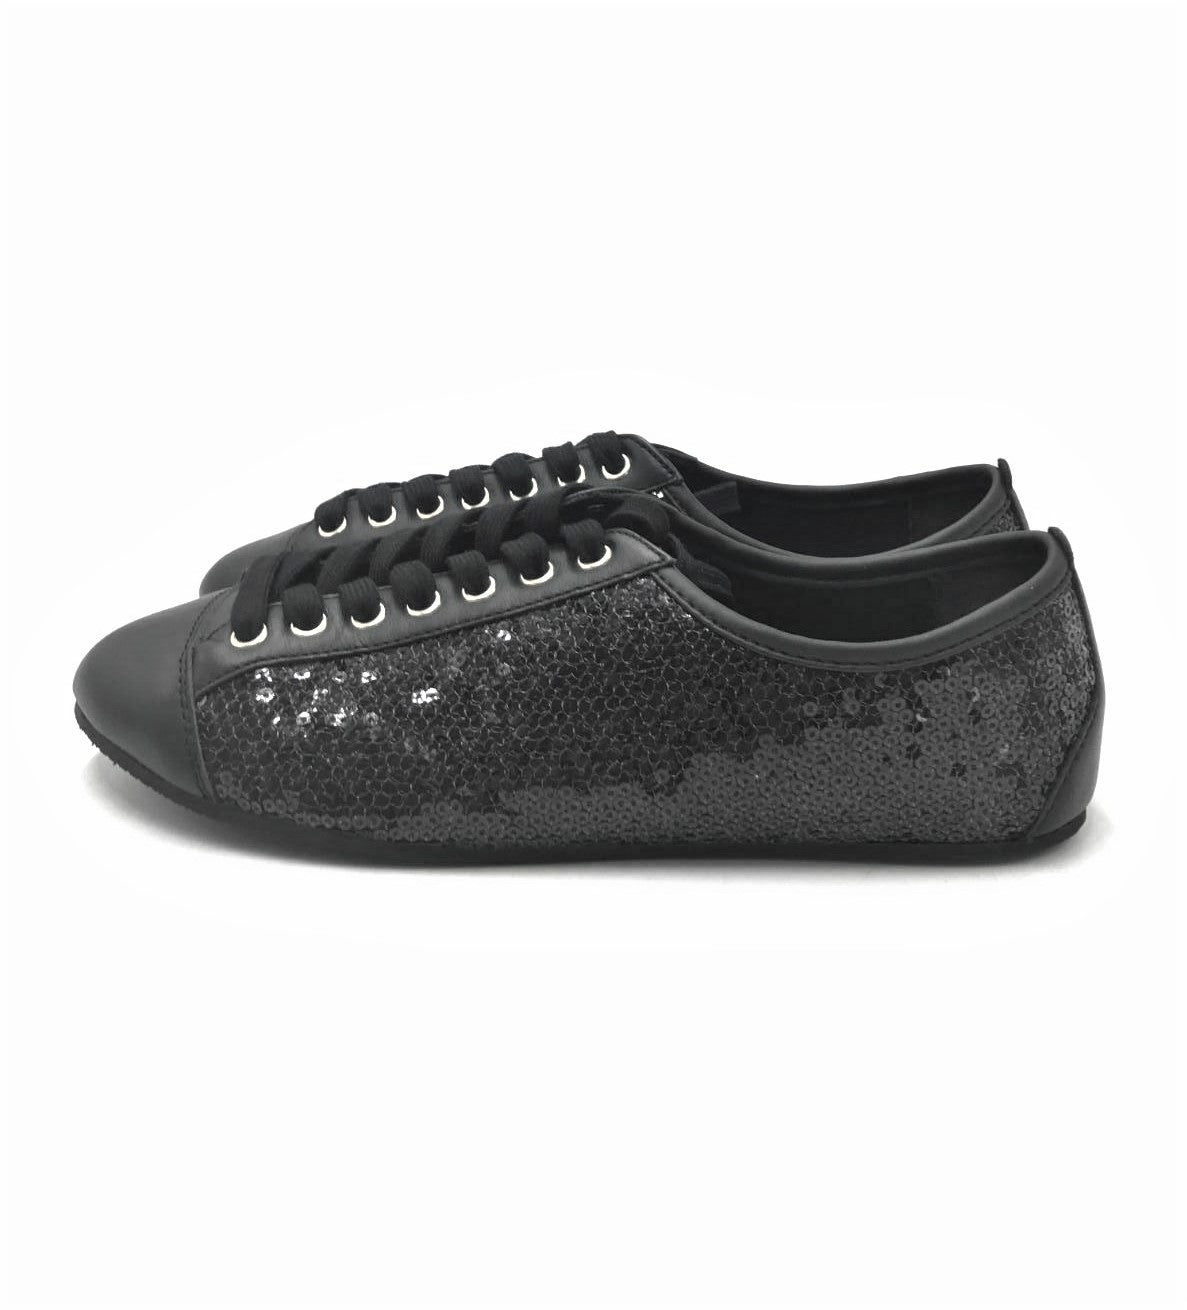 Dolce & Gabbana - Leather and Sequin Flat Sneakers